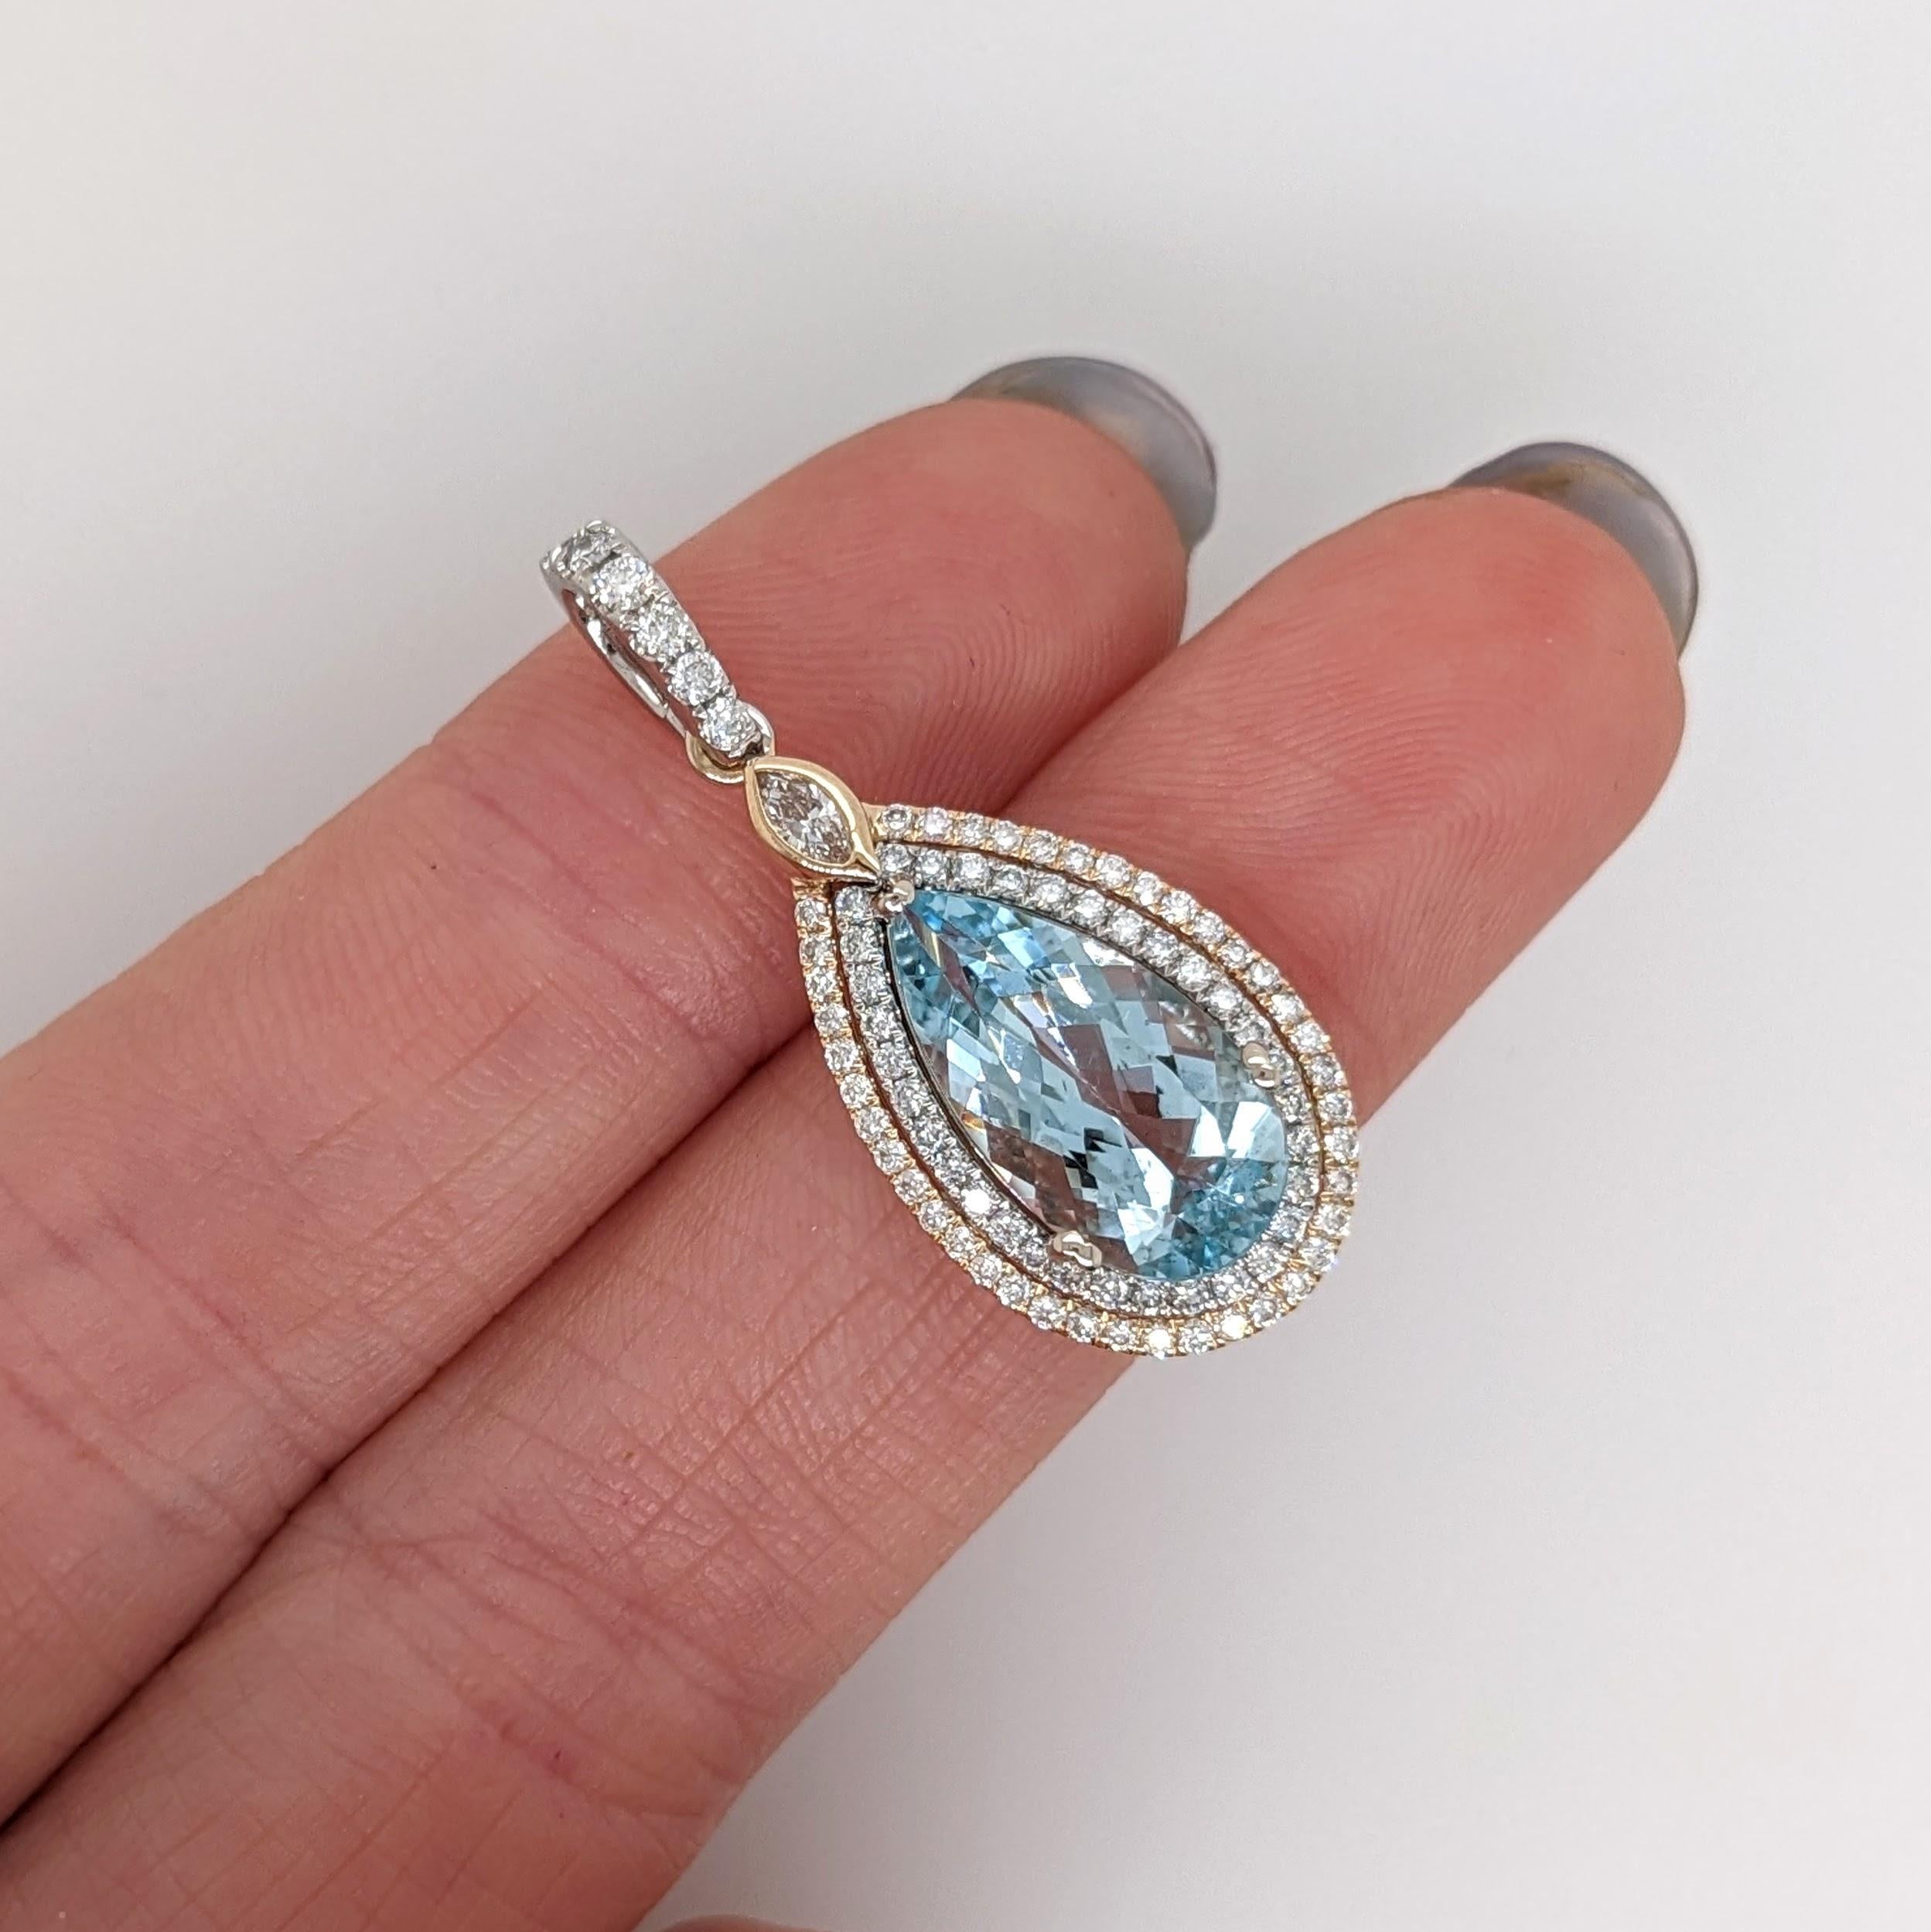 3ct Aquamarine Pendant w Earth Mined Diamonds in Solid 14K Dual Gold Pear 15x8mm In New Condition For Sale In Columbus, OH